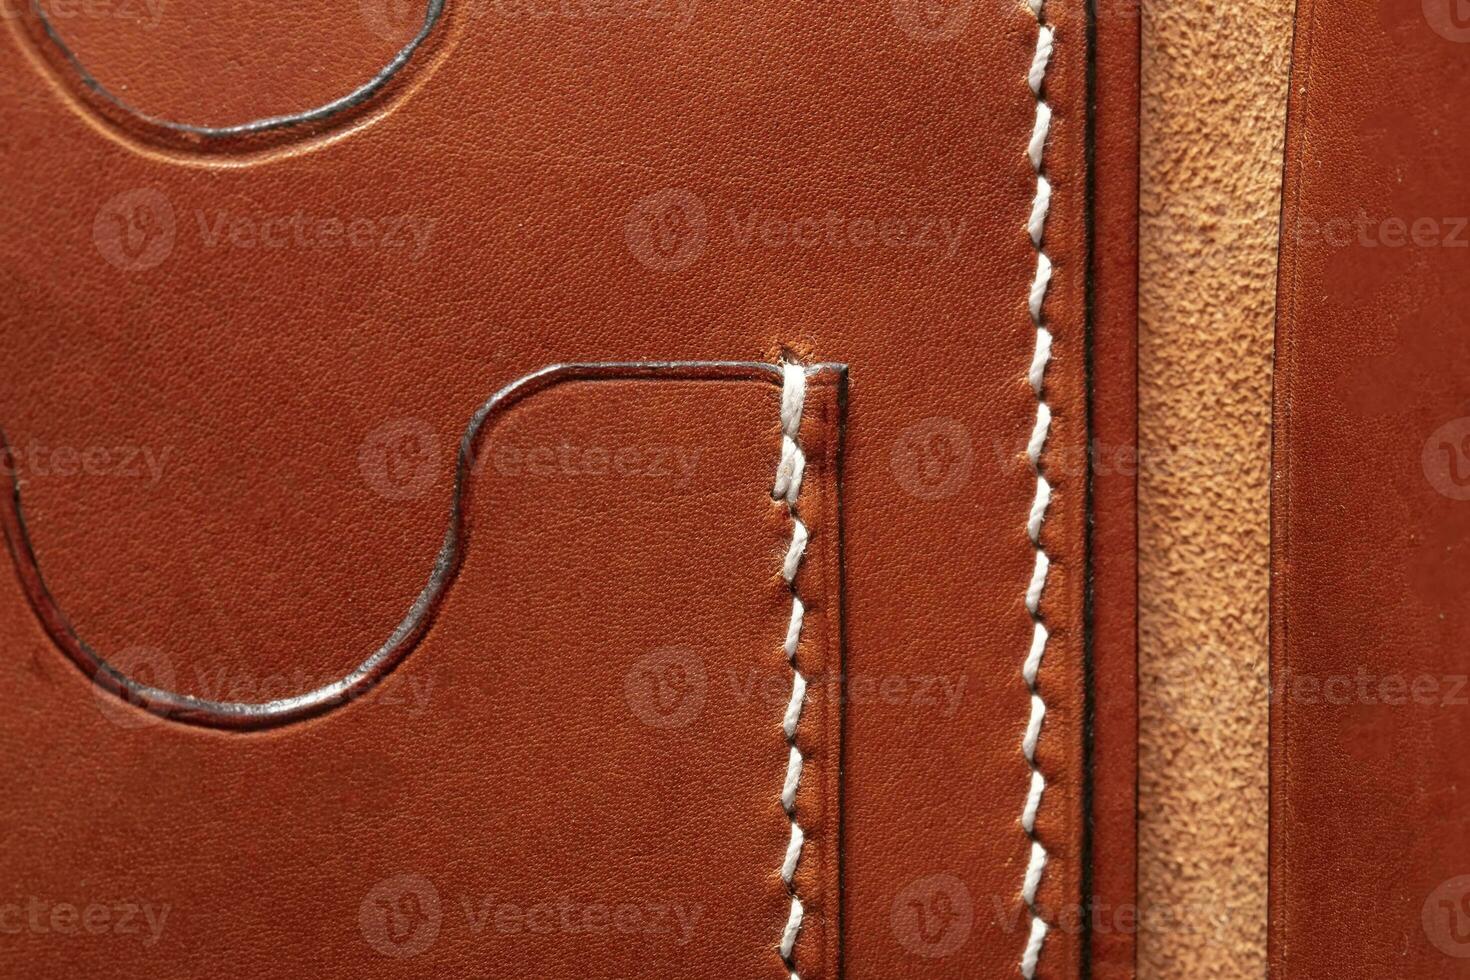 Part of a brown leather wallet or purse close-up. photo